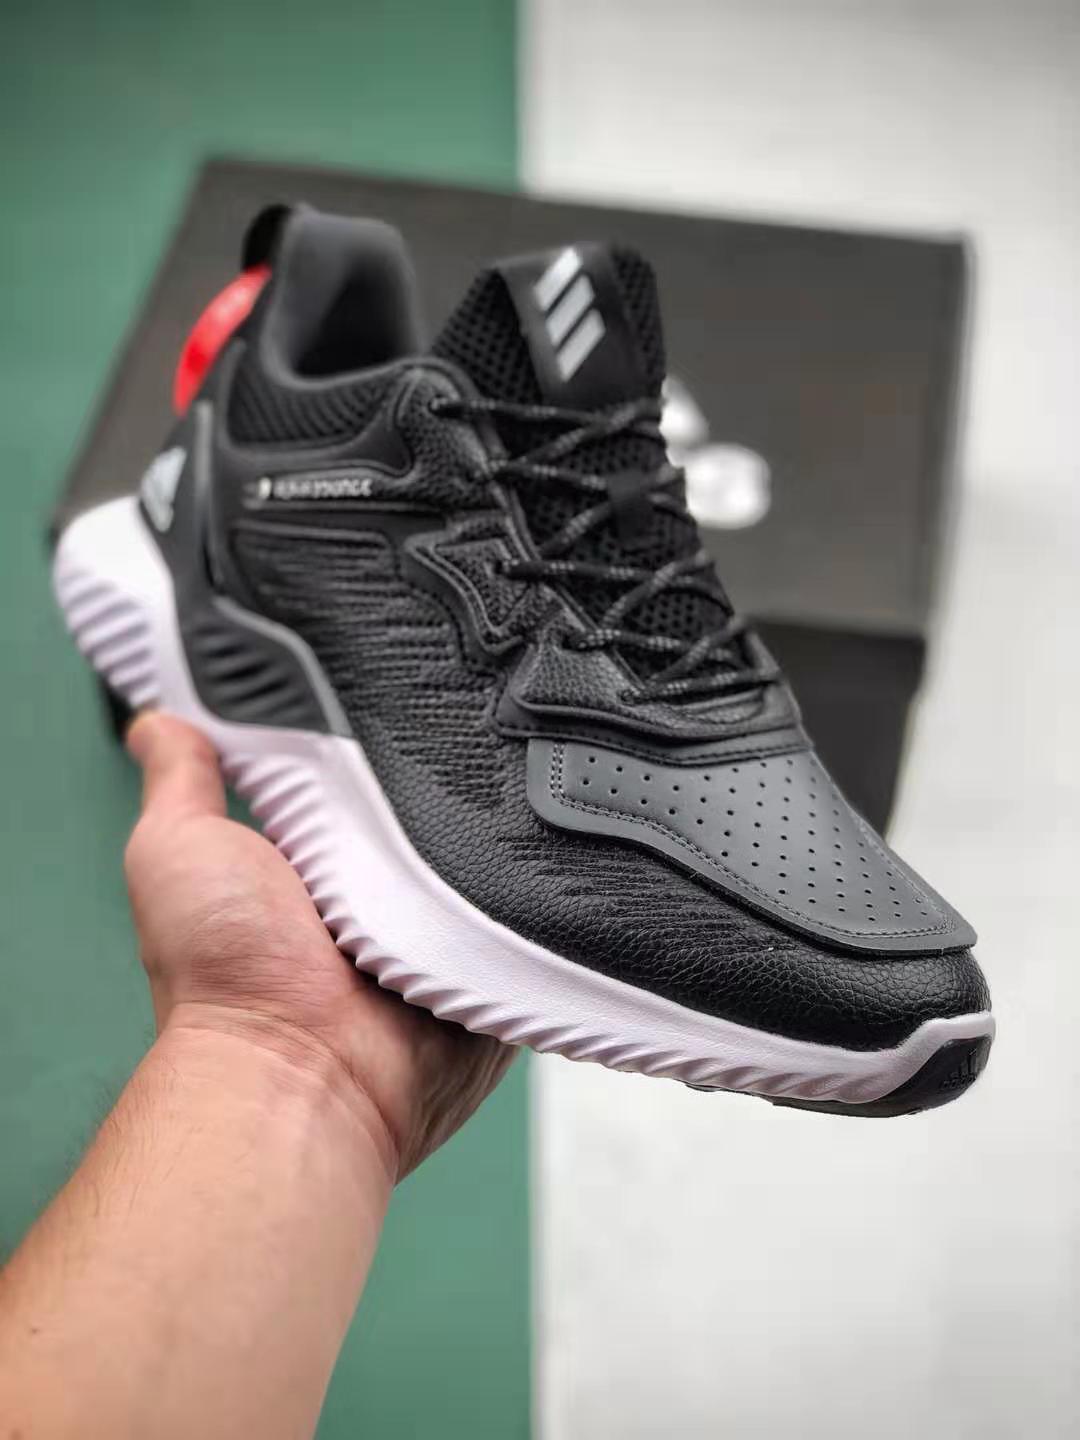 Adidas Alphabounce Beyond Core Black Cloud White B32282 - Performance and Style in One